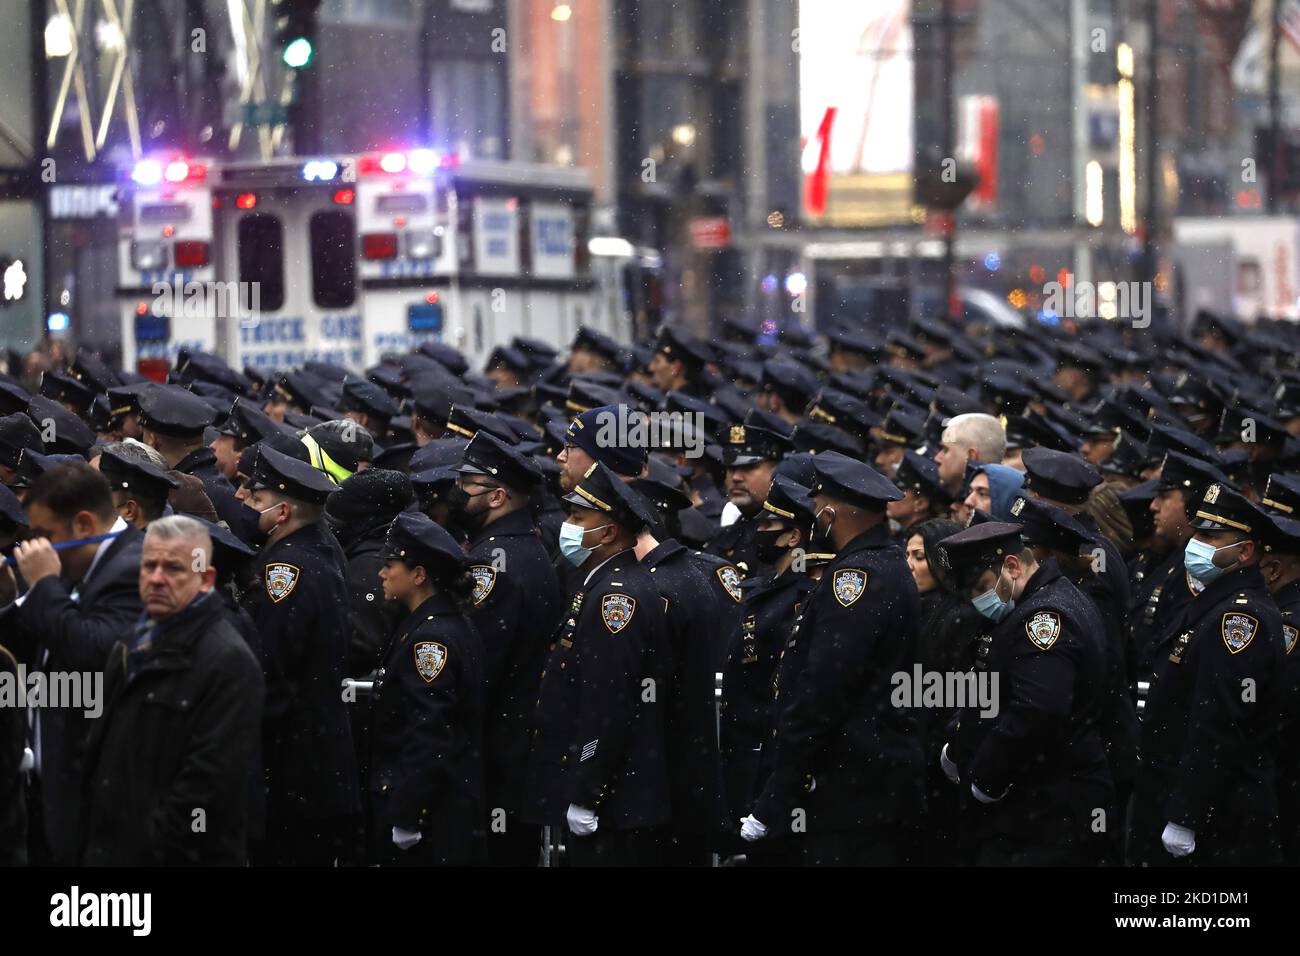 Thousands of police officers from various jurisdictions around the country attend the funeral for the slain NYPD officer Jason Rivera on January 28, 2022 in New York city, USA. The young officer was killed less than a week ago while responding to a domestic disturbance in Harlem. His partner Wilbert Mora who was also shot during the incident, died days later and will be laid to rest next week. (Photo by John Lamparski/NurPhoto) Stock Photo